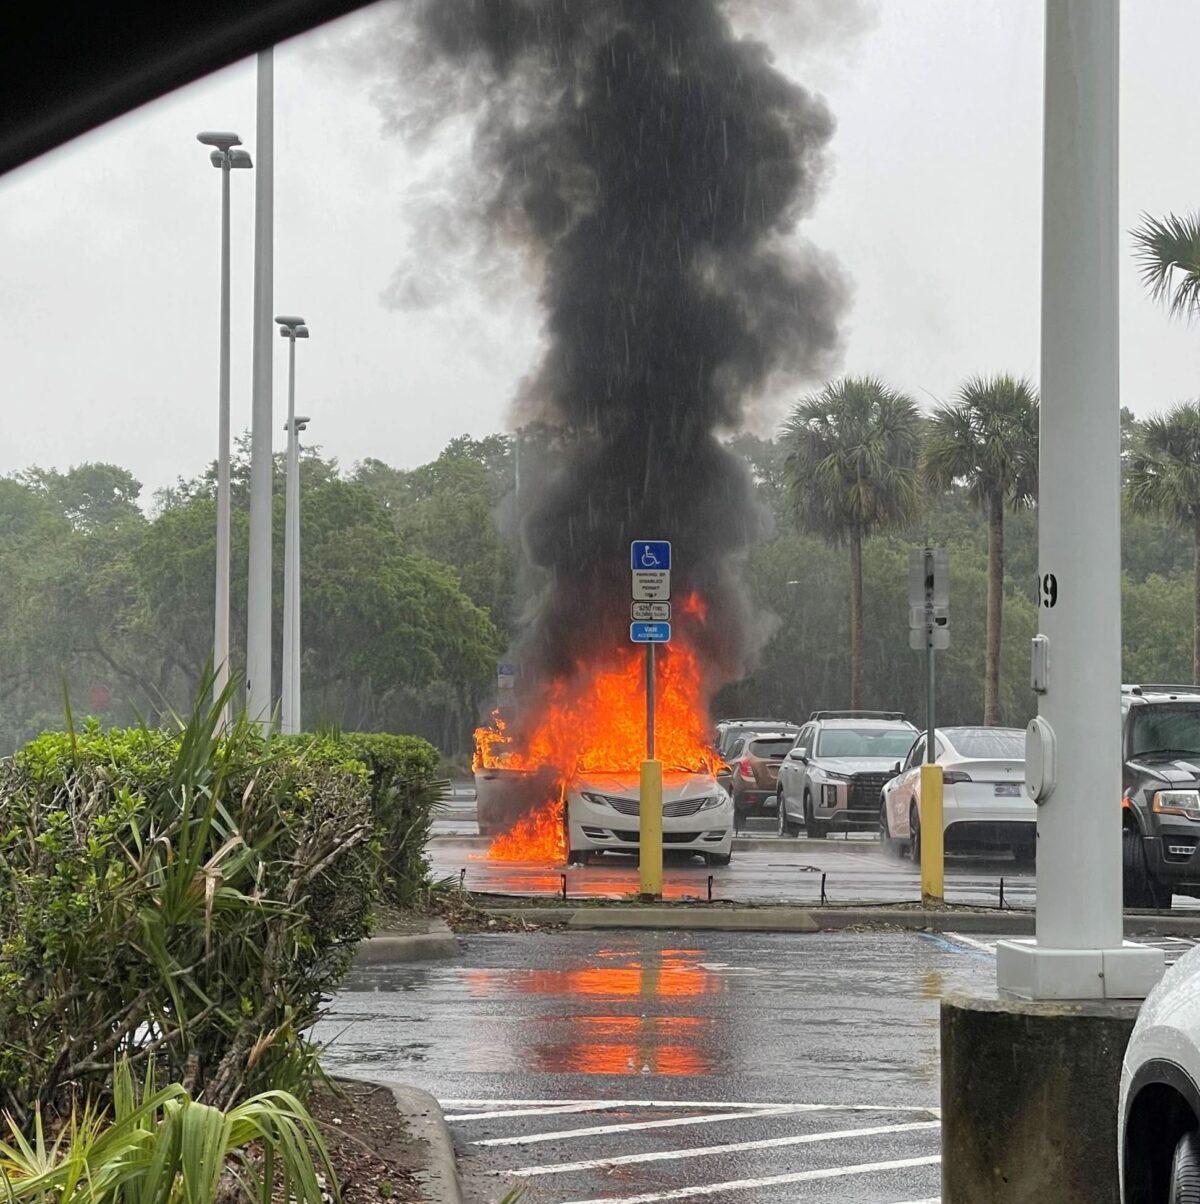 A burning vehicle outside the Oviedo Mall, in Oviedo, Fla., on May 26, 2023. (Courtesy of Oviedo Police Department)